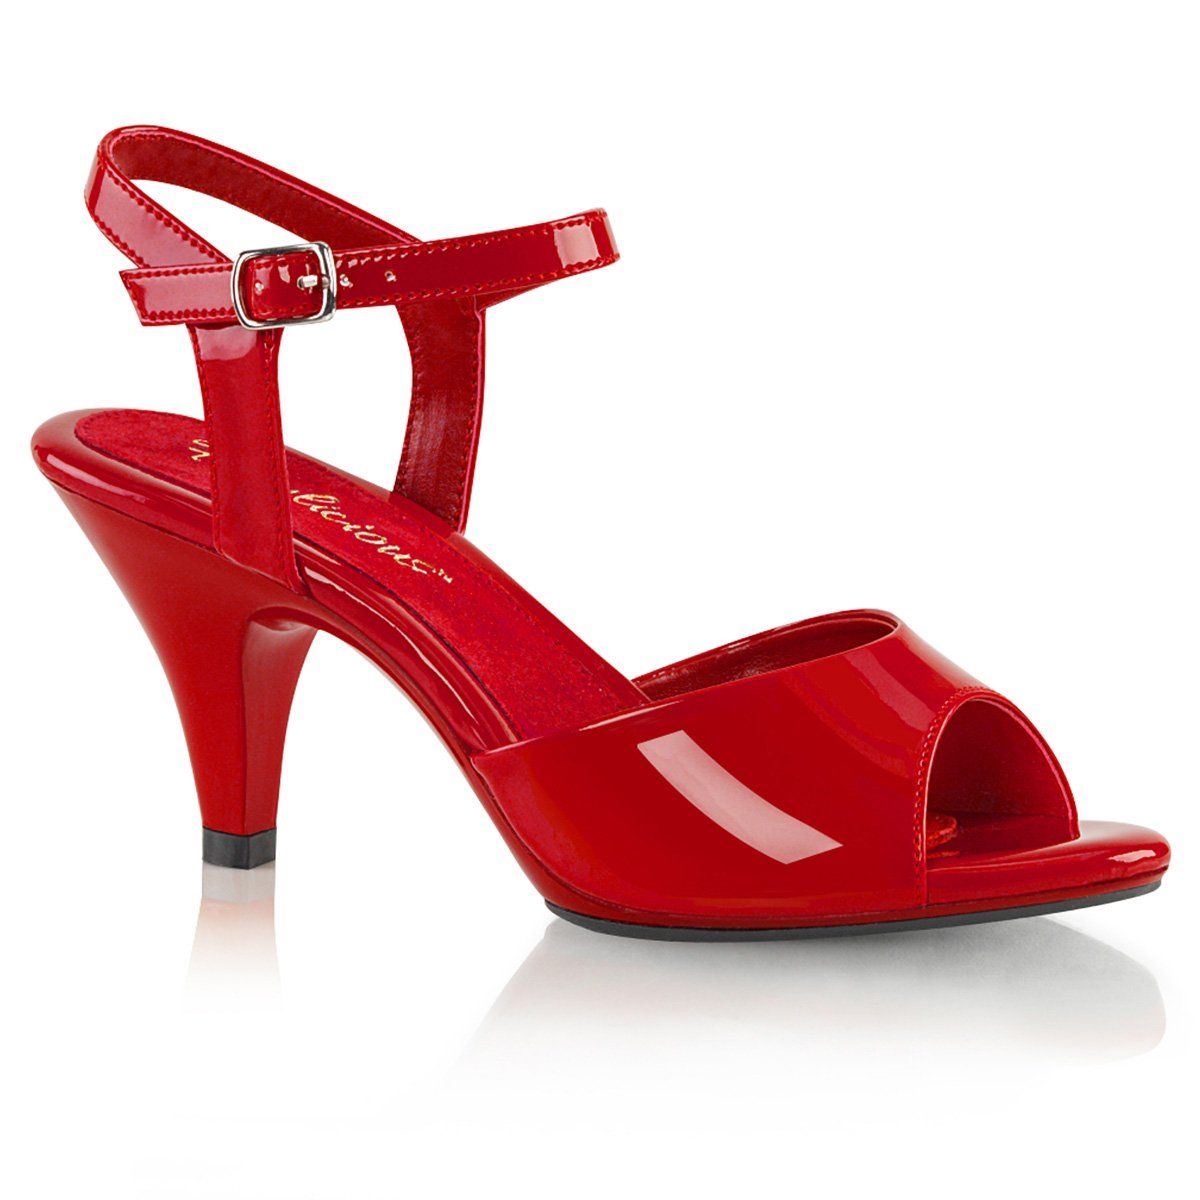 BELLE-309 Red Patent Fabulicious